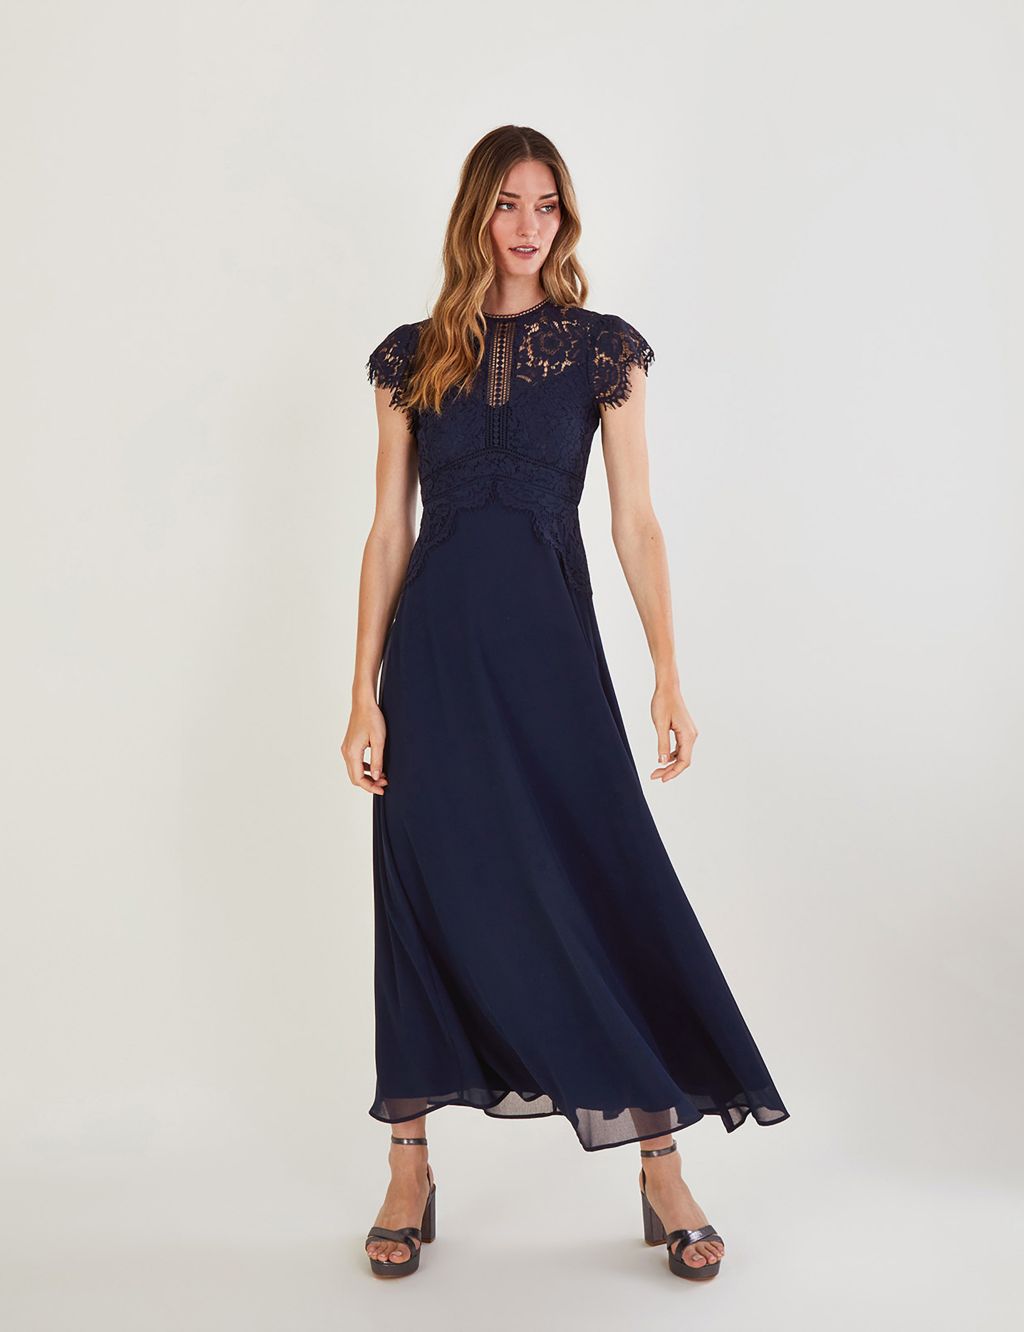 Lace Embroidered Maxi Waisted Dress image 1